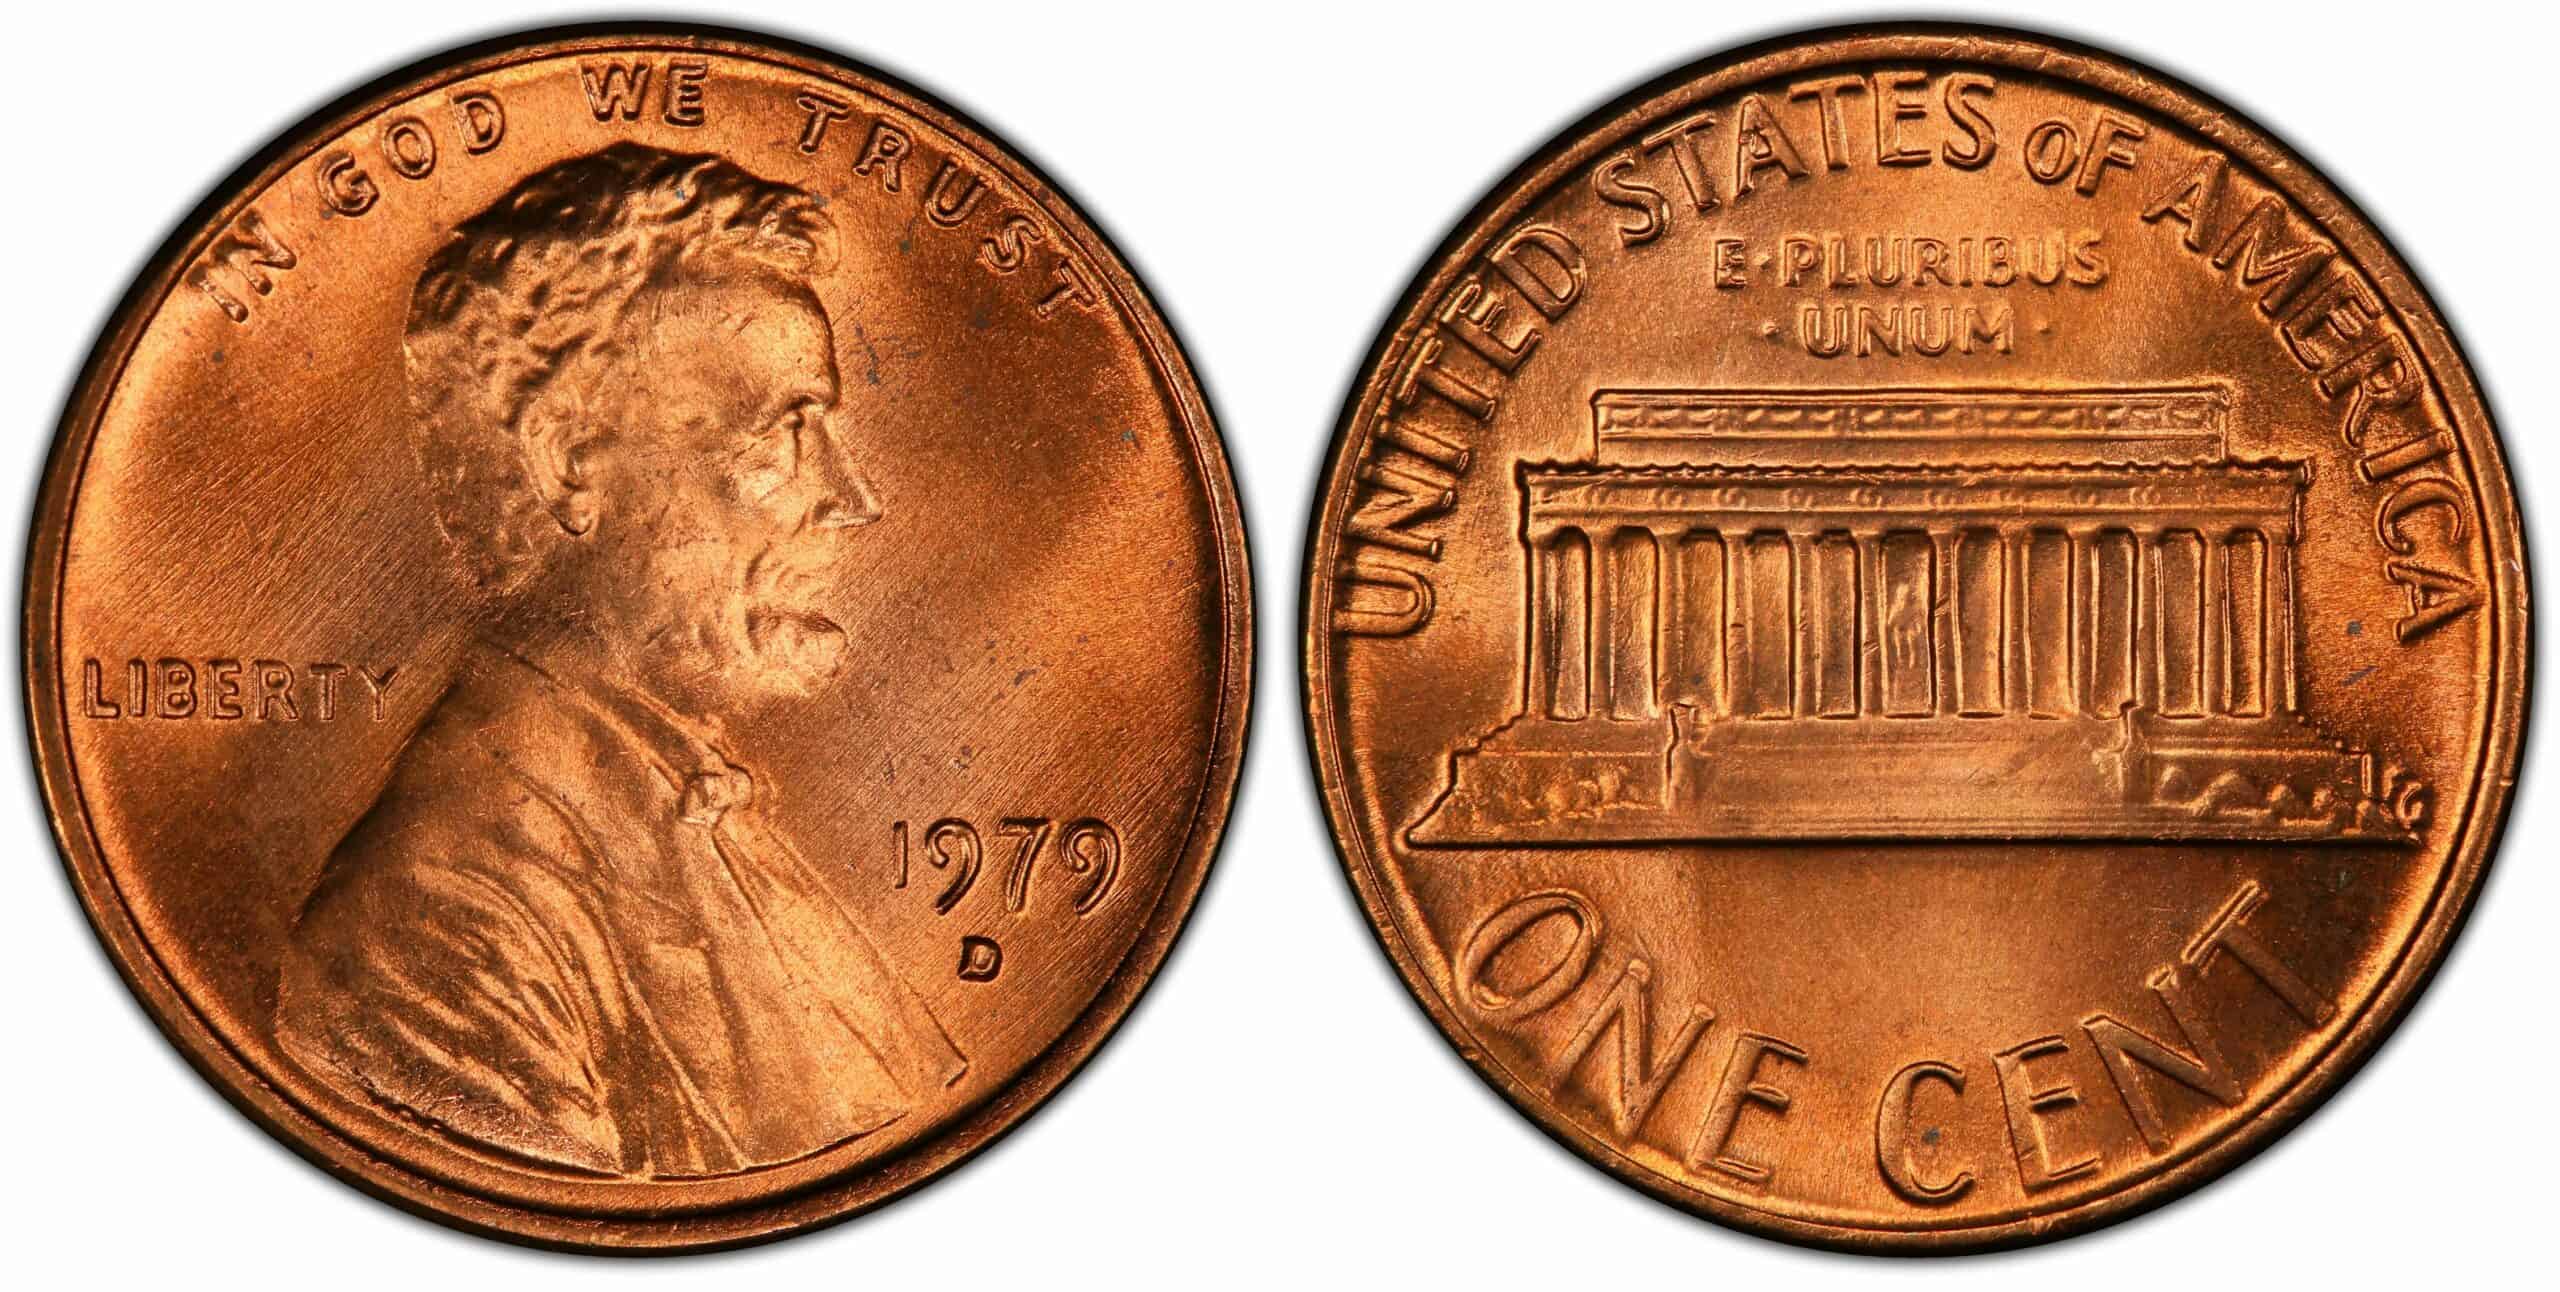 1979 D Penny Value